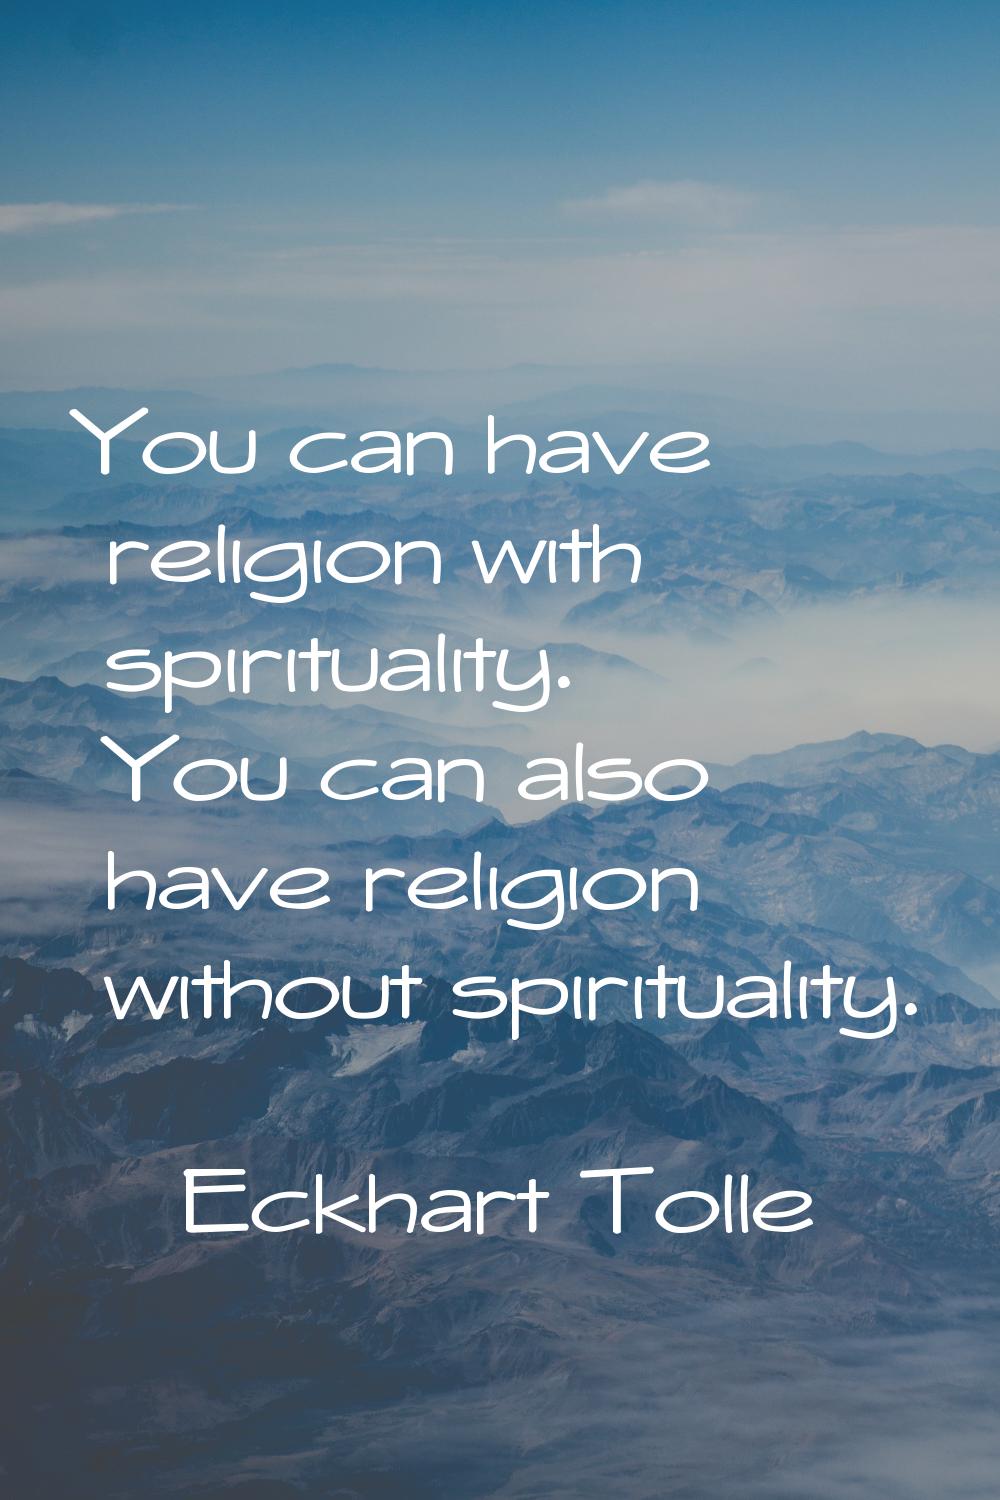 You can have religion with spirituality. You can also have religion without spirituality.